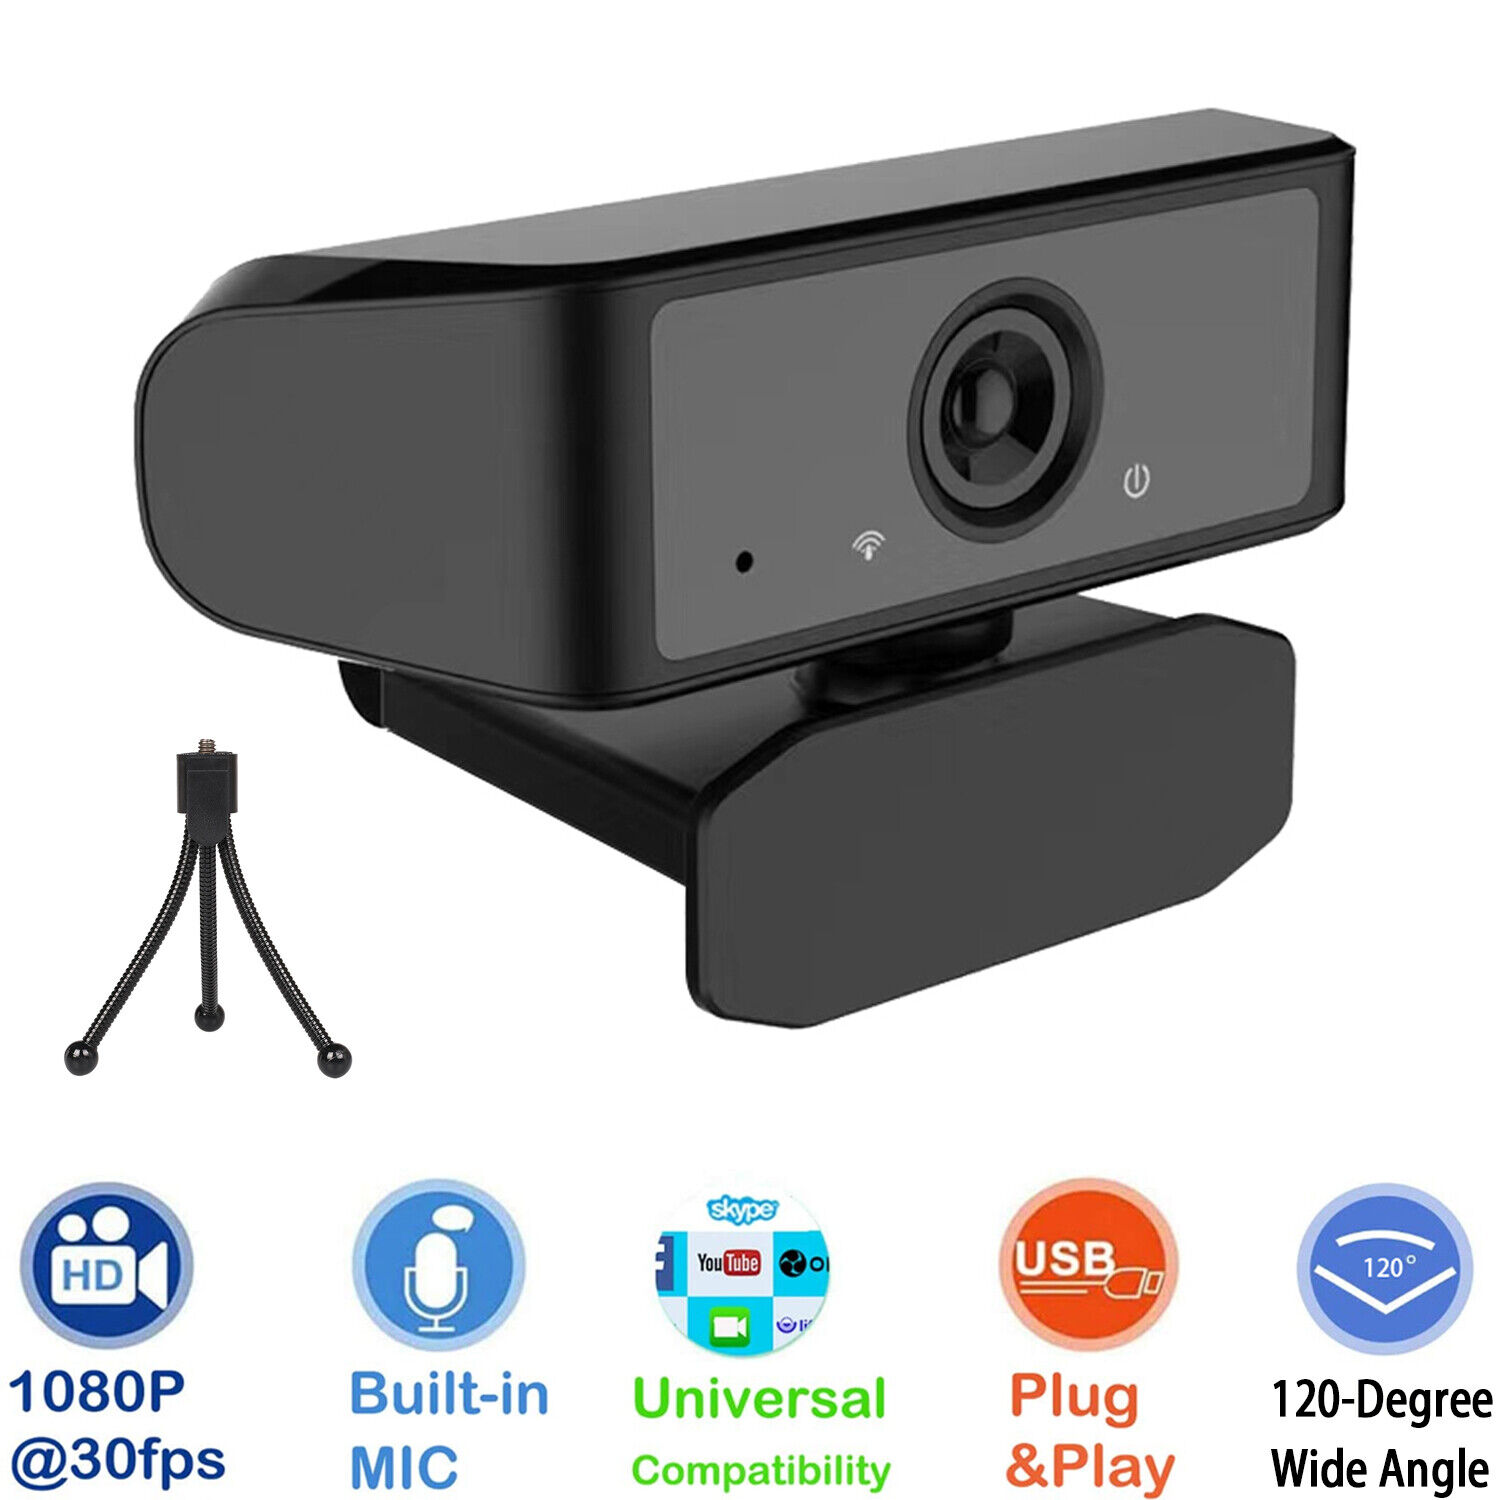  Webcam with Microphone 1080P | Plug & Play 120-Degree Widescreen 360° Rotatable